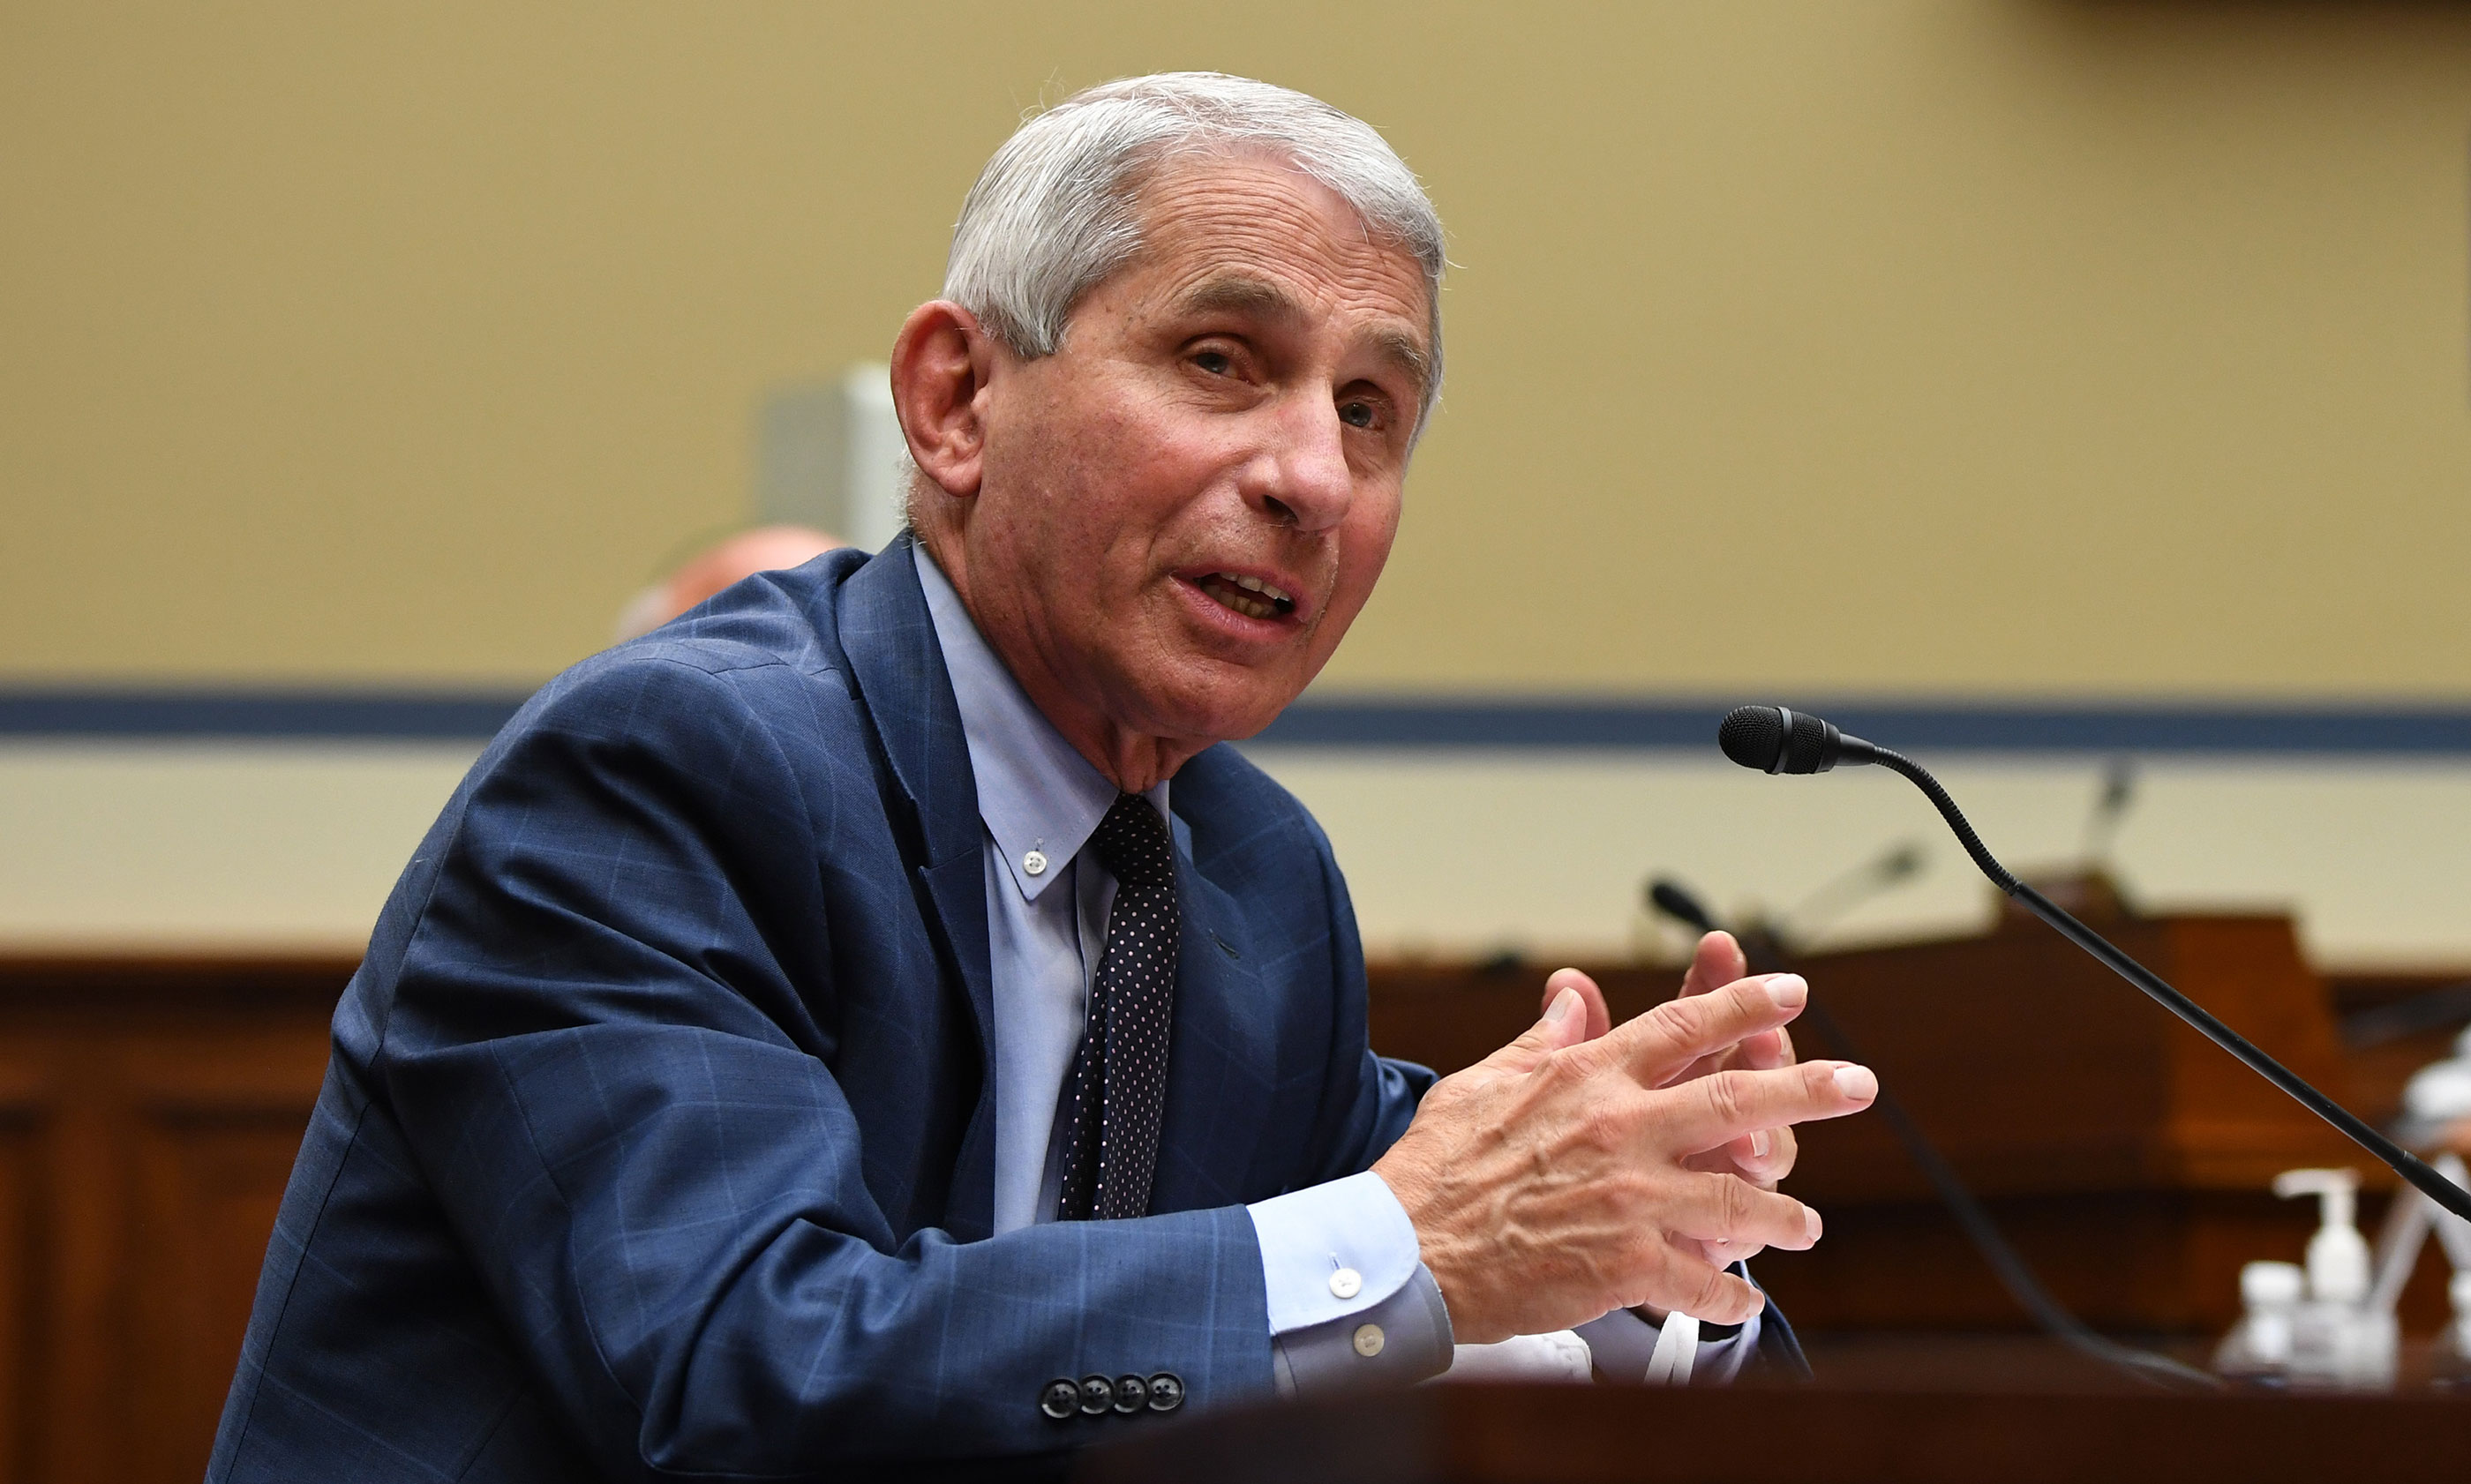 Dr. Anthony Fauci, director of the National Institute for Allergy and Infectious Diseases, testifies during a House Subcommittee on the Coronavirus Crisis hearing on July 31 in Washington, DC.